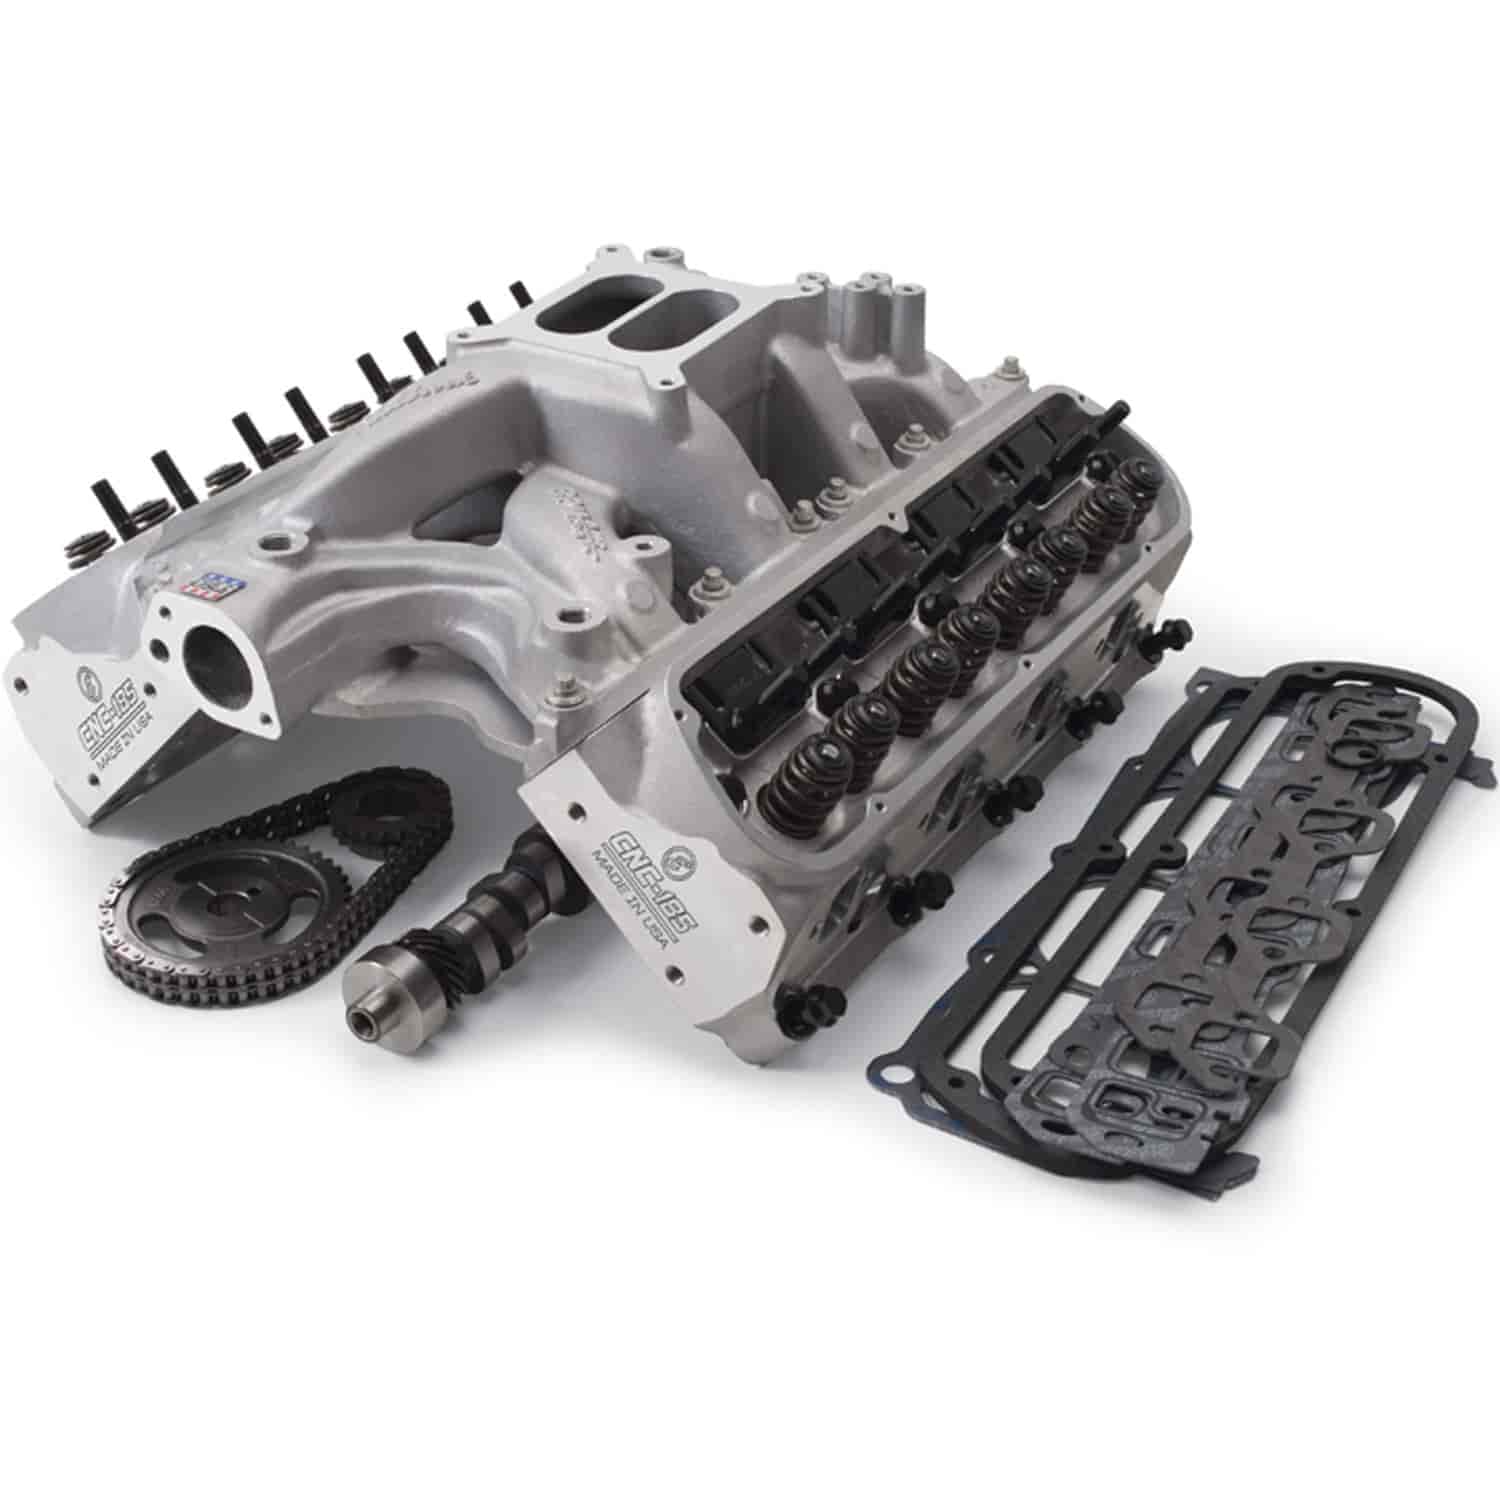 RPM Power Package Top End Kit for 1969-1995 Small Block Ford 351W